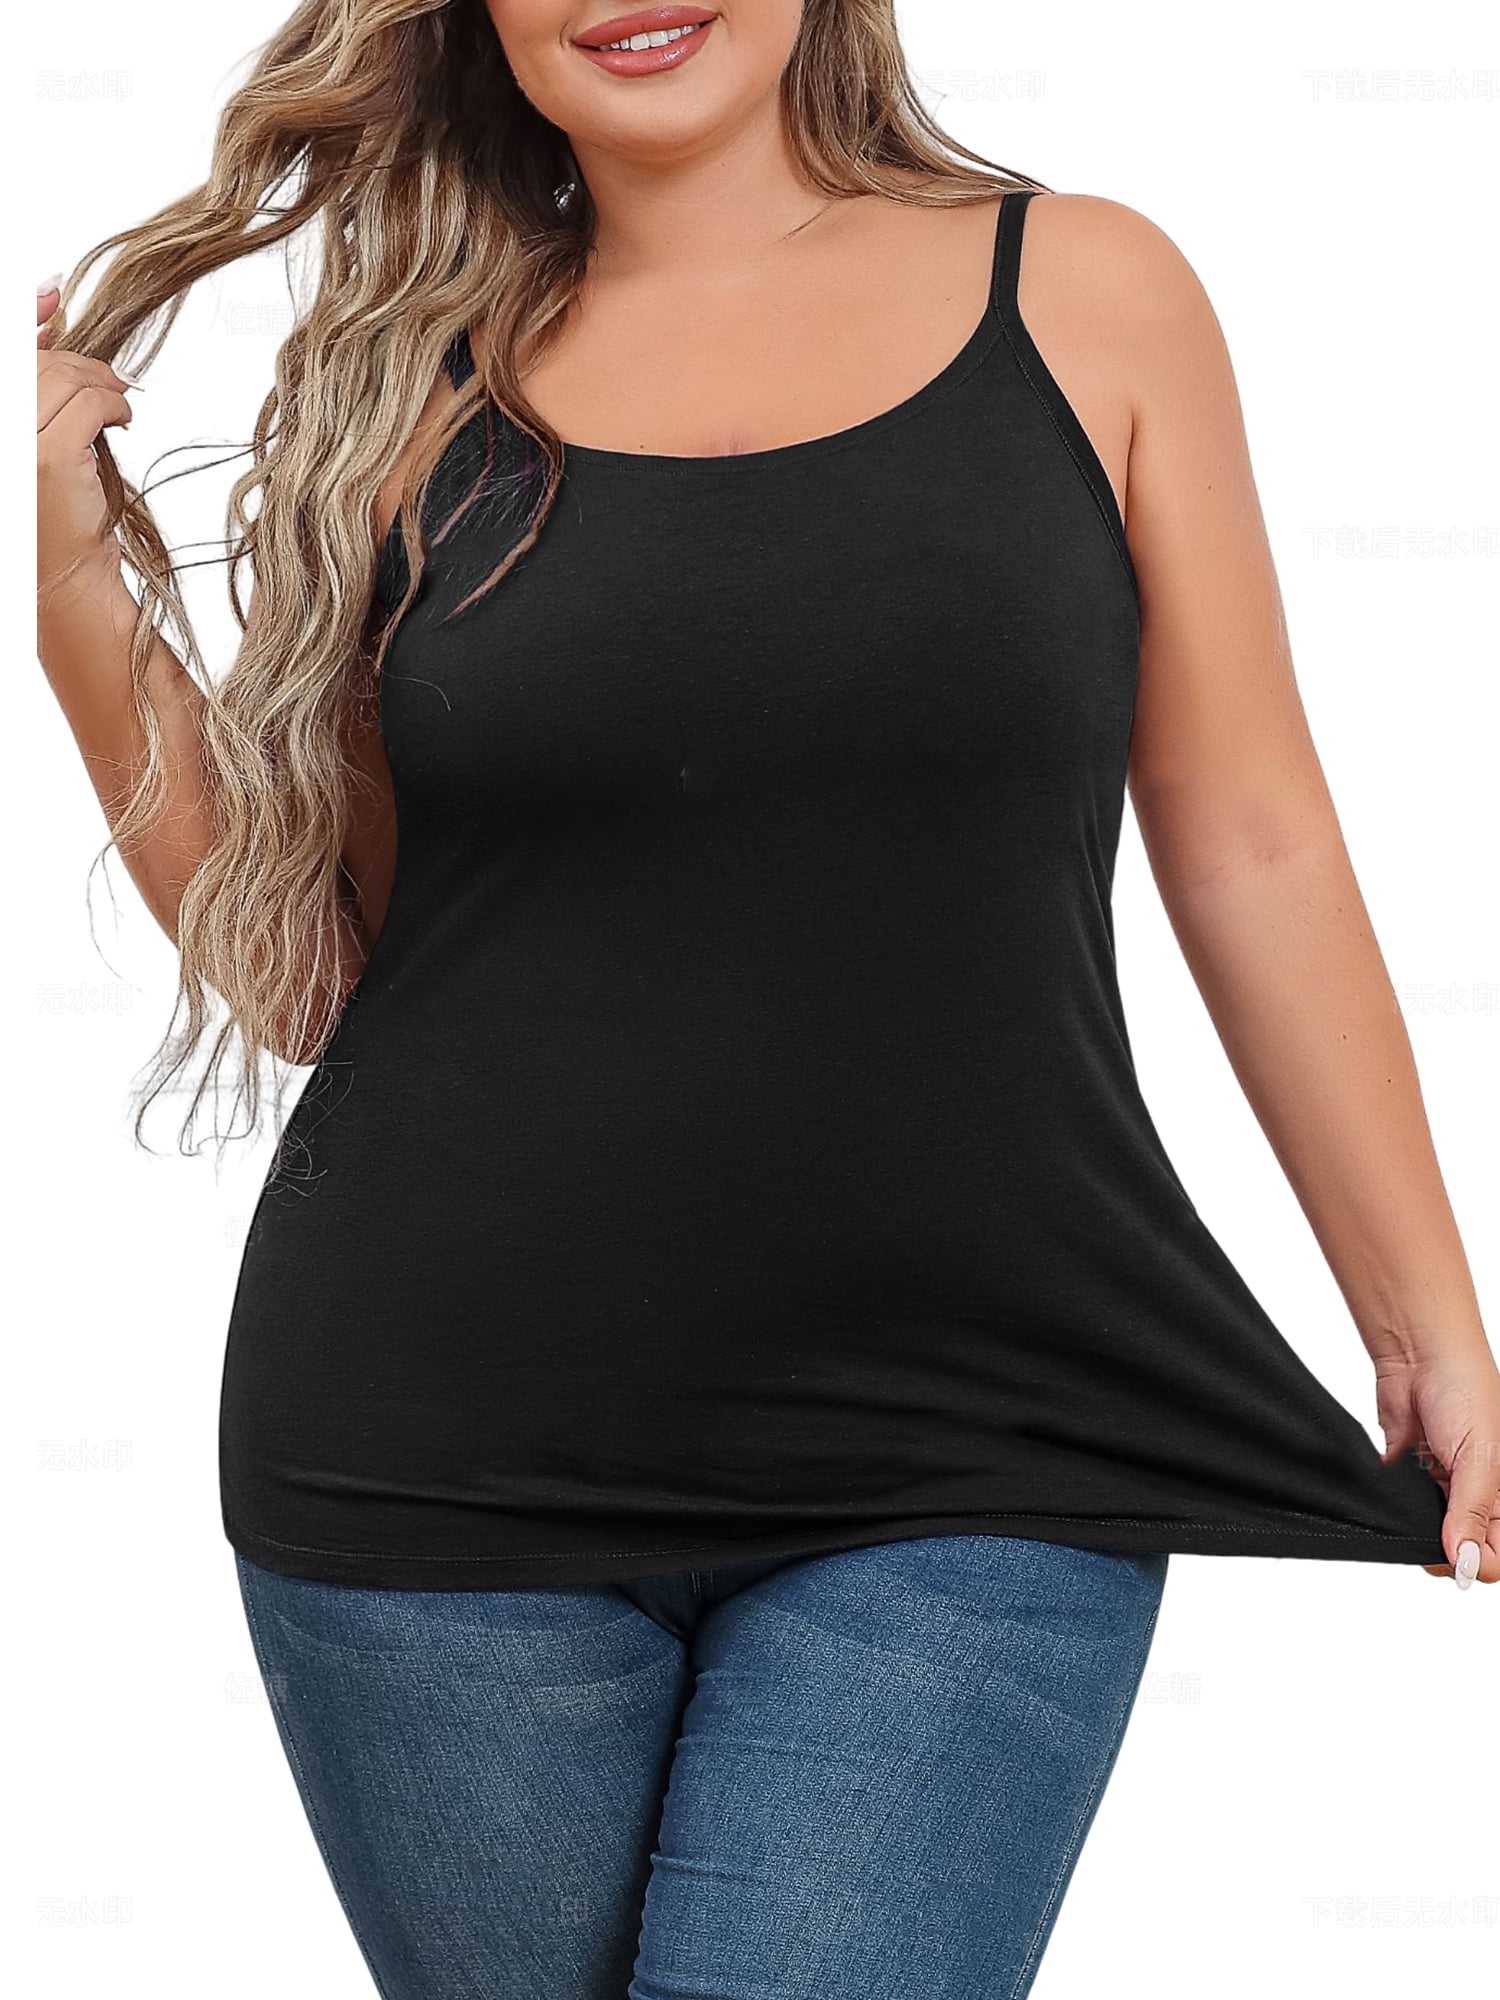 Charmo Plus Size Tank Tops for Womens Adjustable Strap Cotton